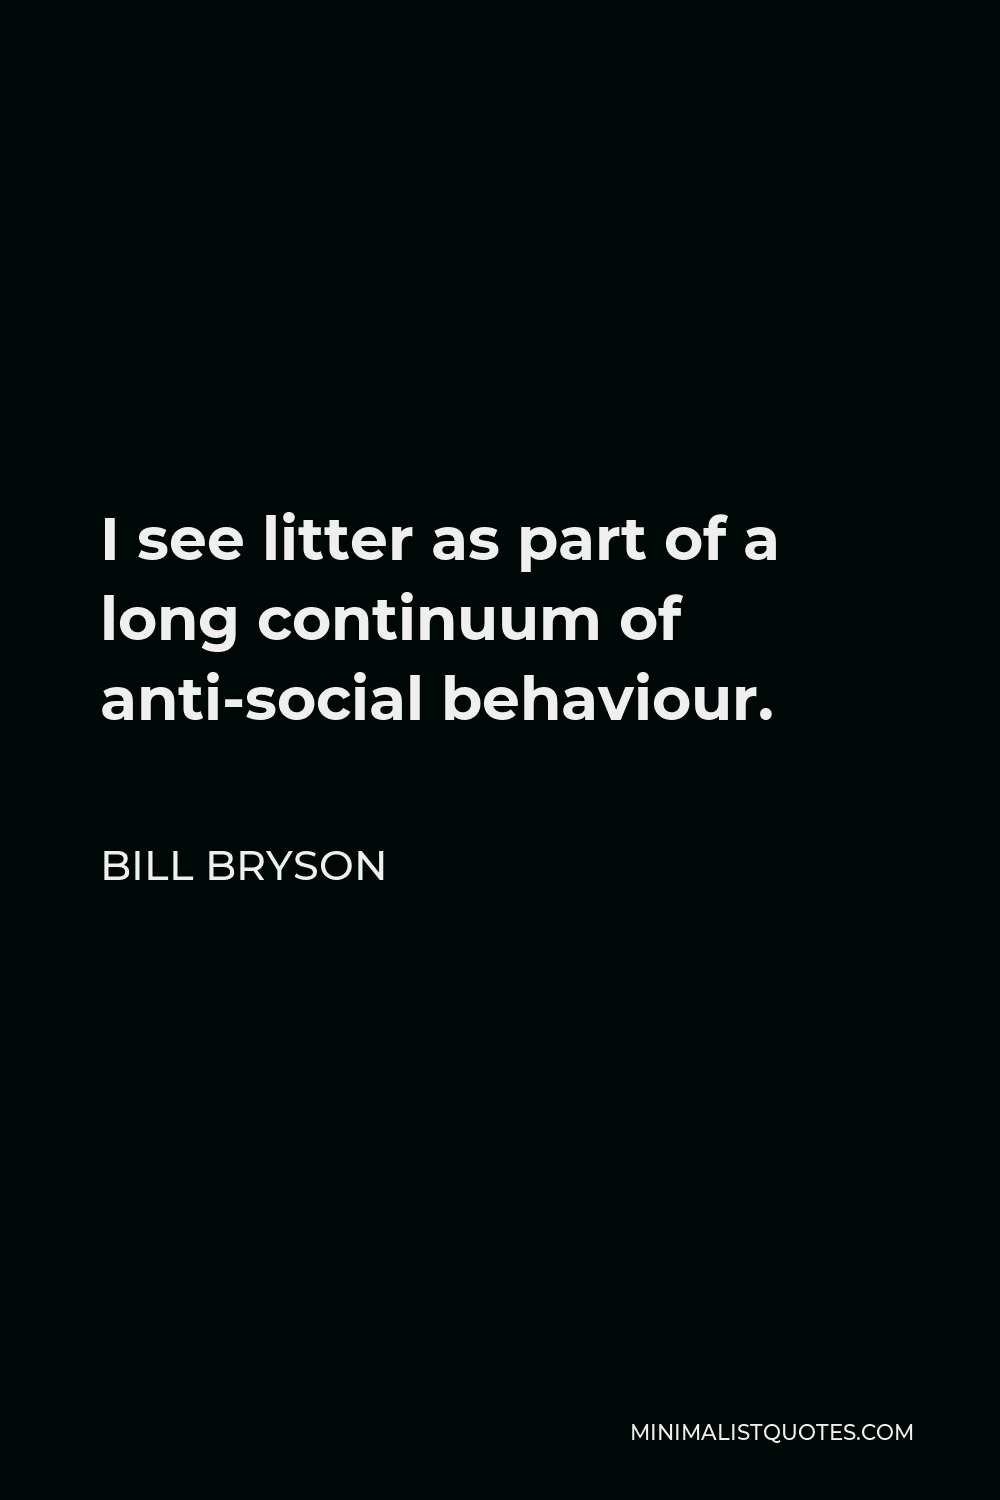 Bill Bryson Quote - I see litter as part of a long continuum of anti-social behaviour.